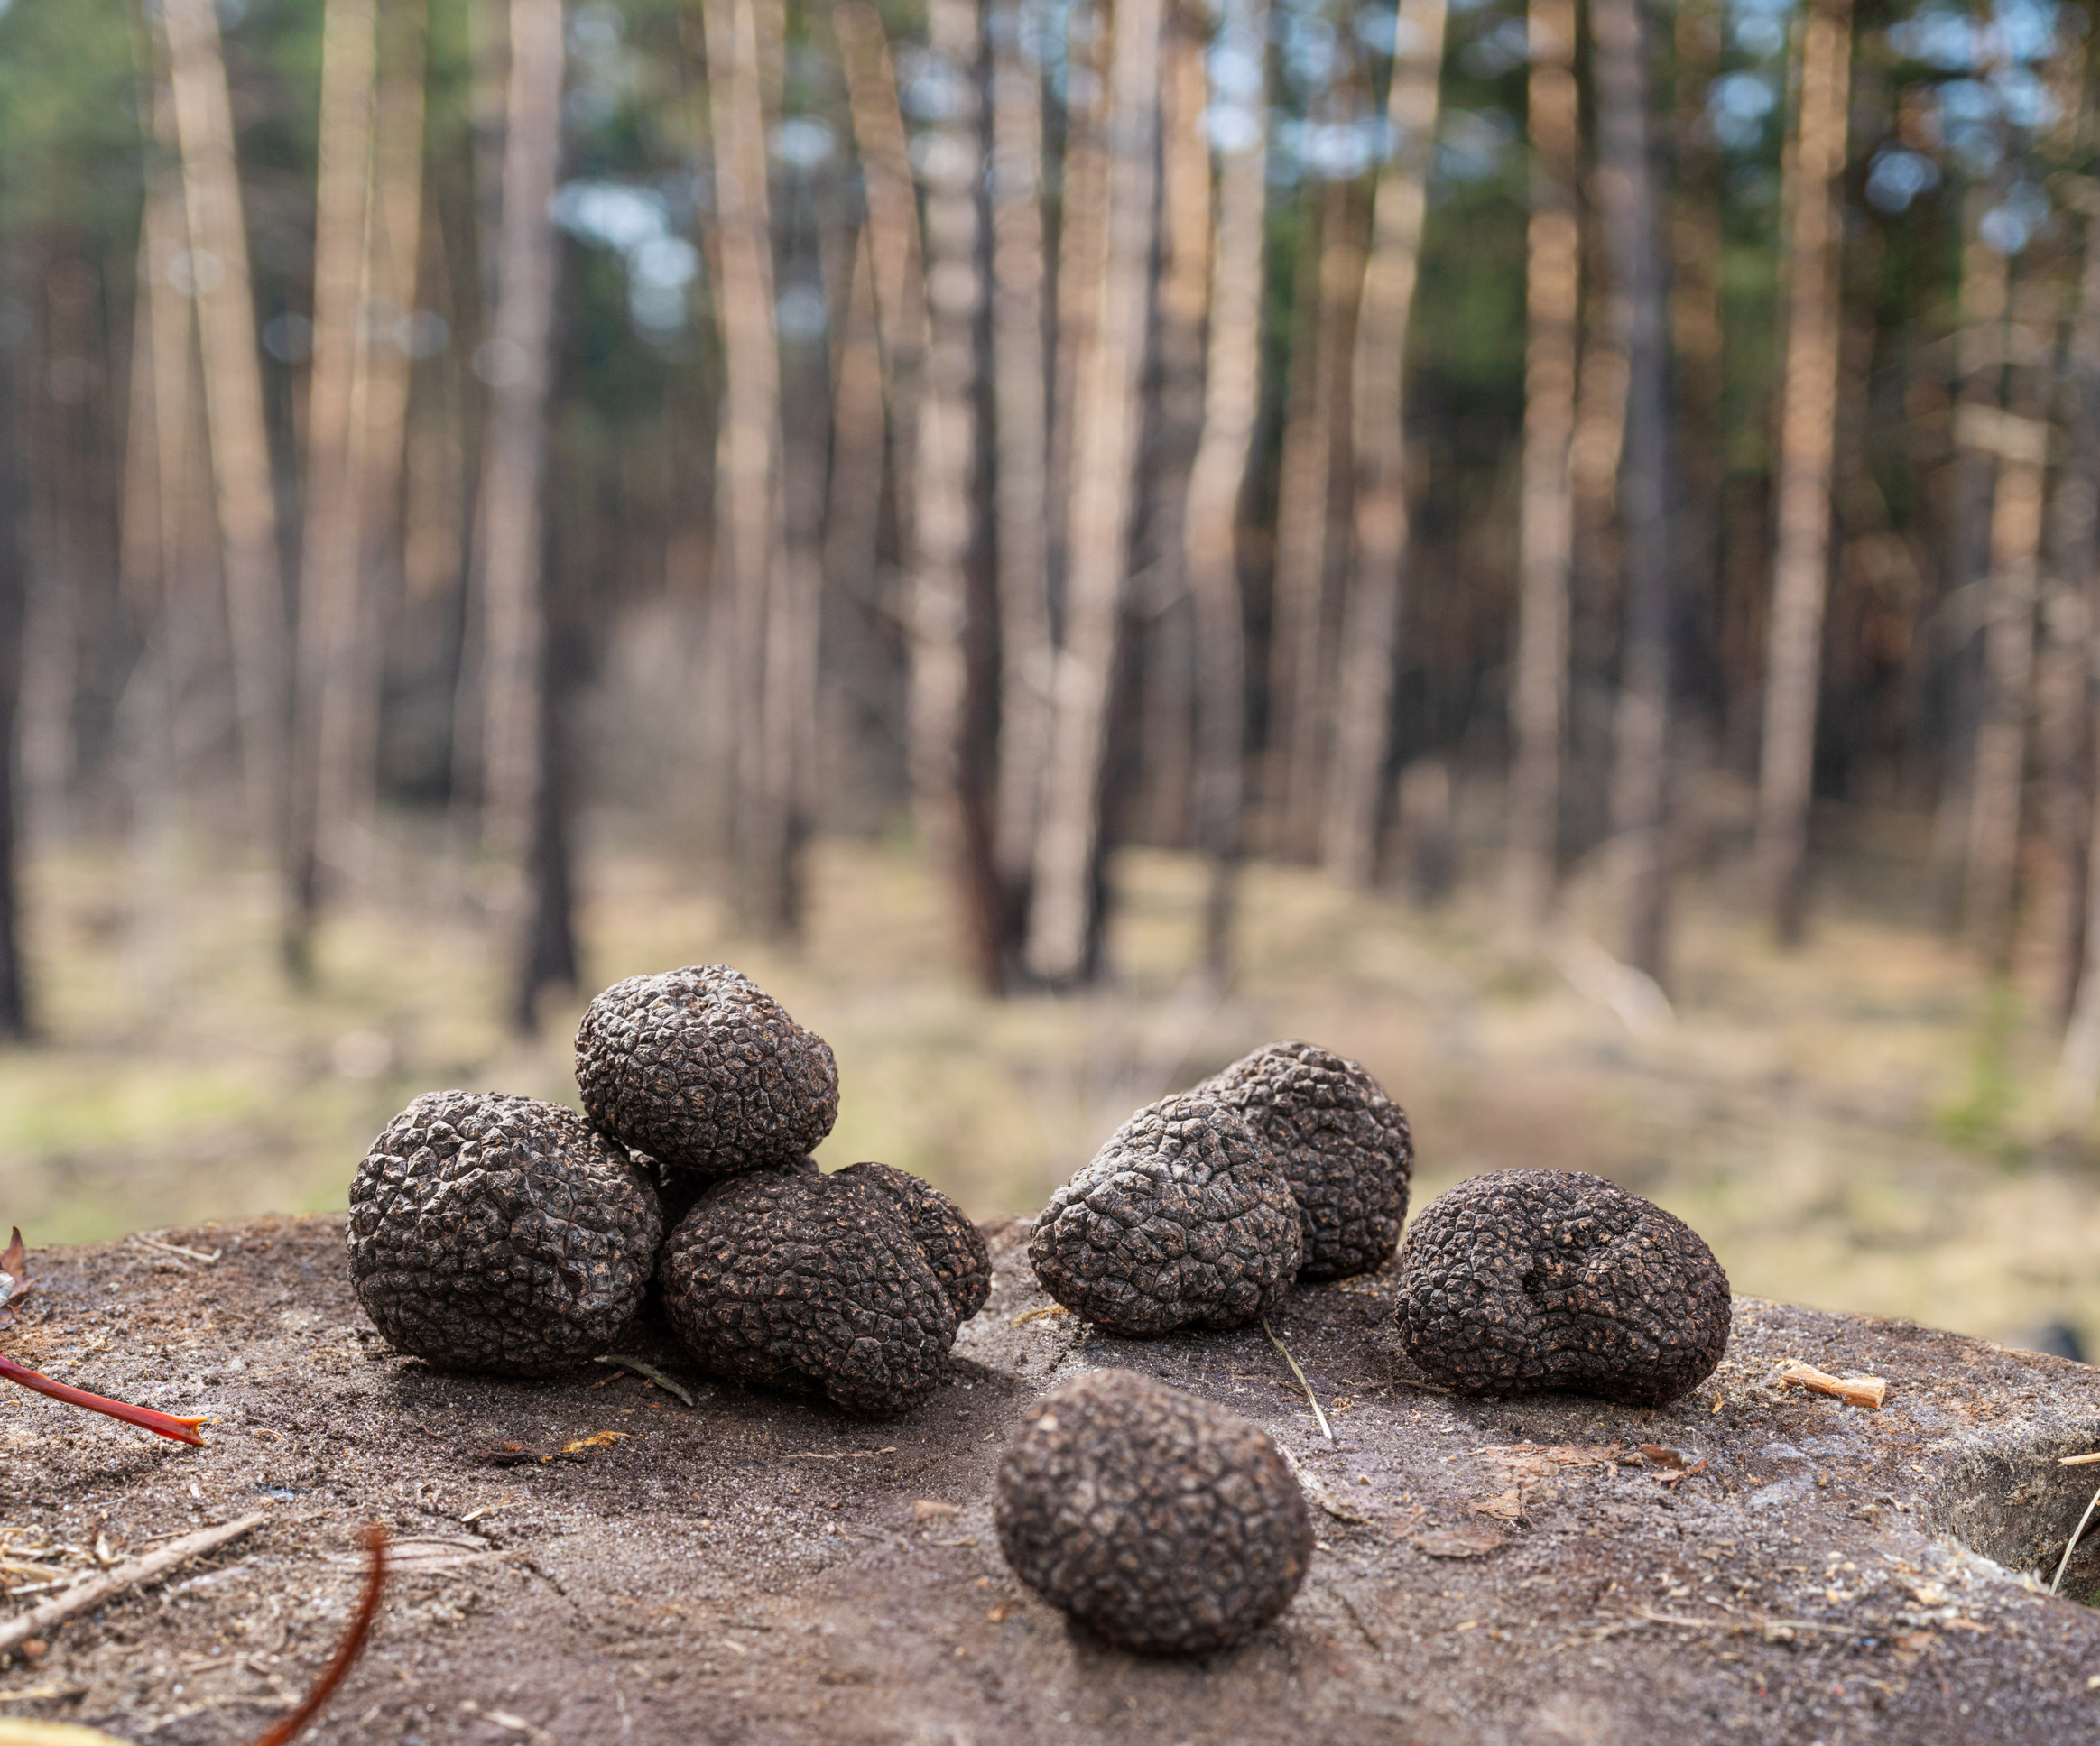 Truffle mushroom hunting. Black edible winter truffles on the wooden table. Nature background.